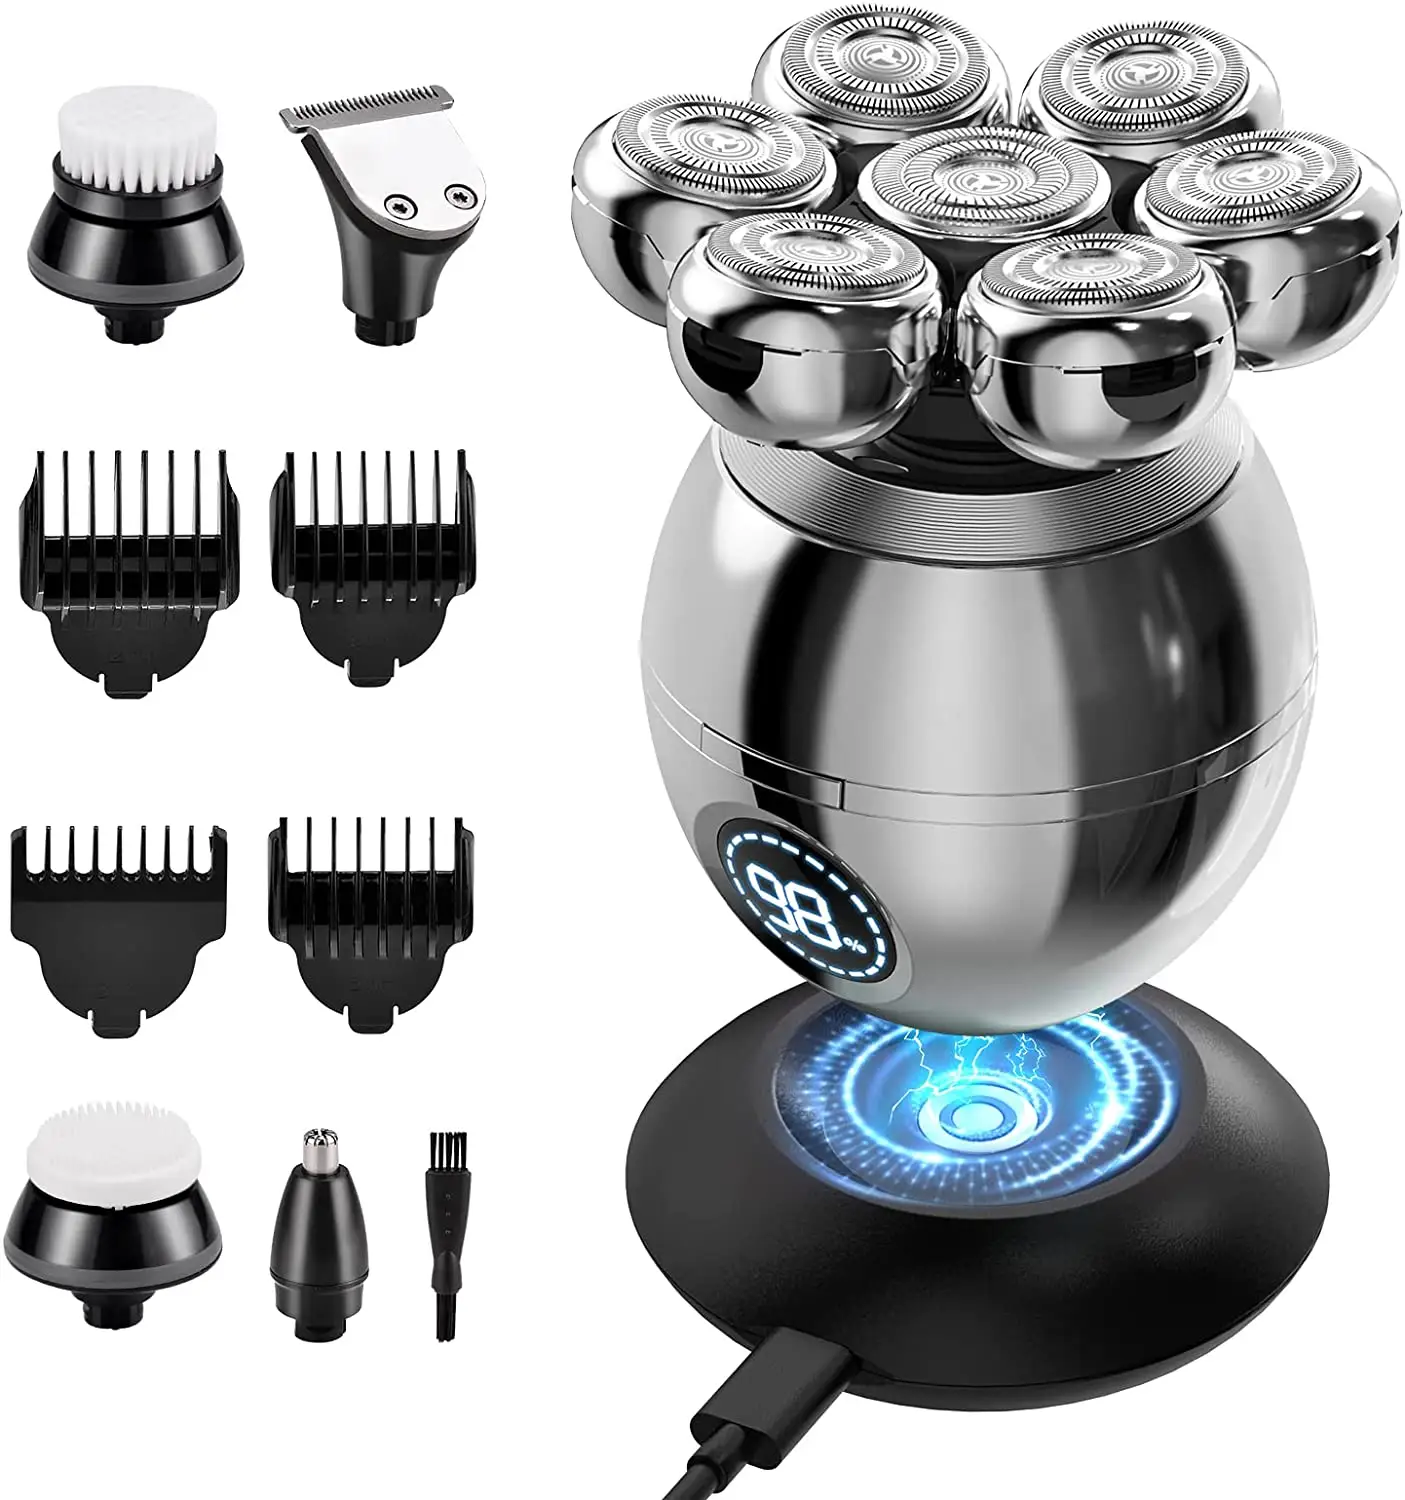 7D Head Shaver for Men 6 in 1 Waterproof with LCD Display Bald Head Shavers for Men Wet Dry Electric Razor for Men